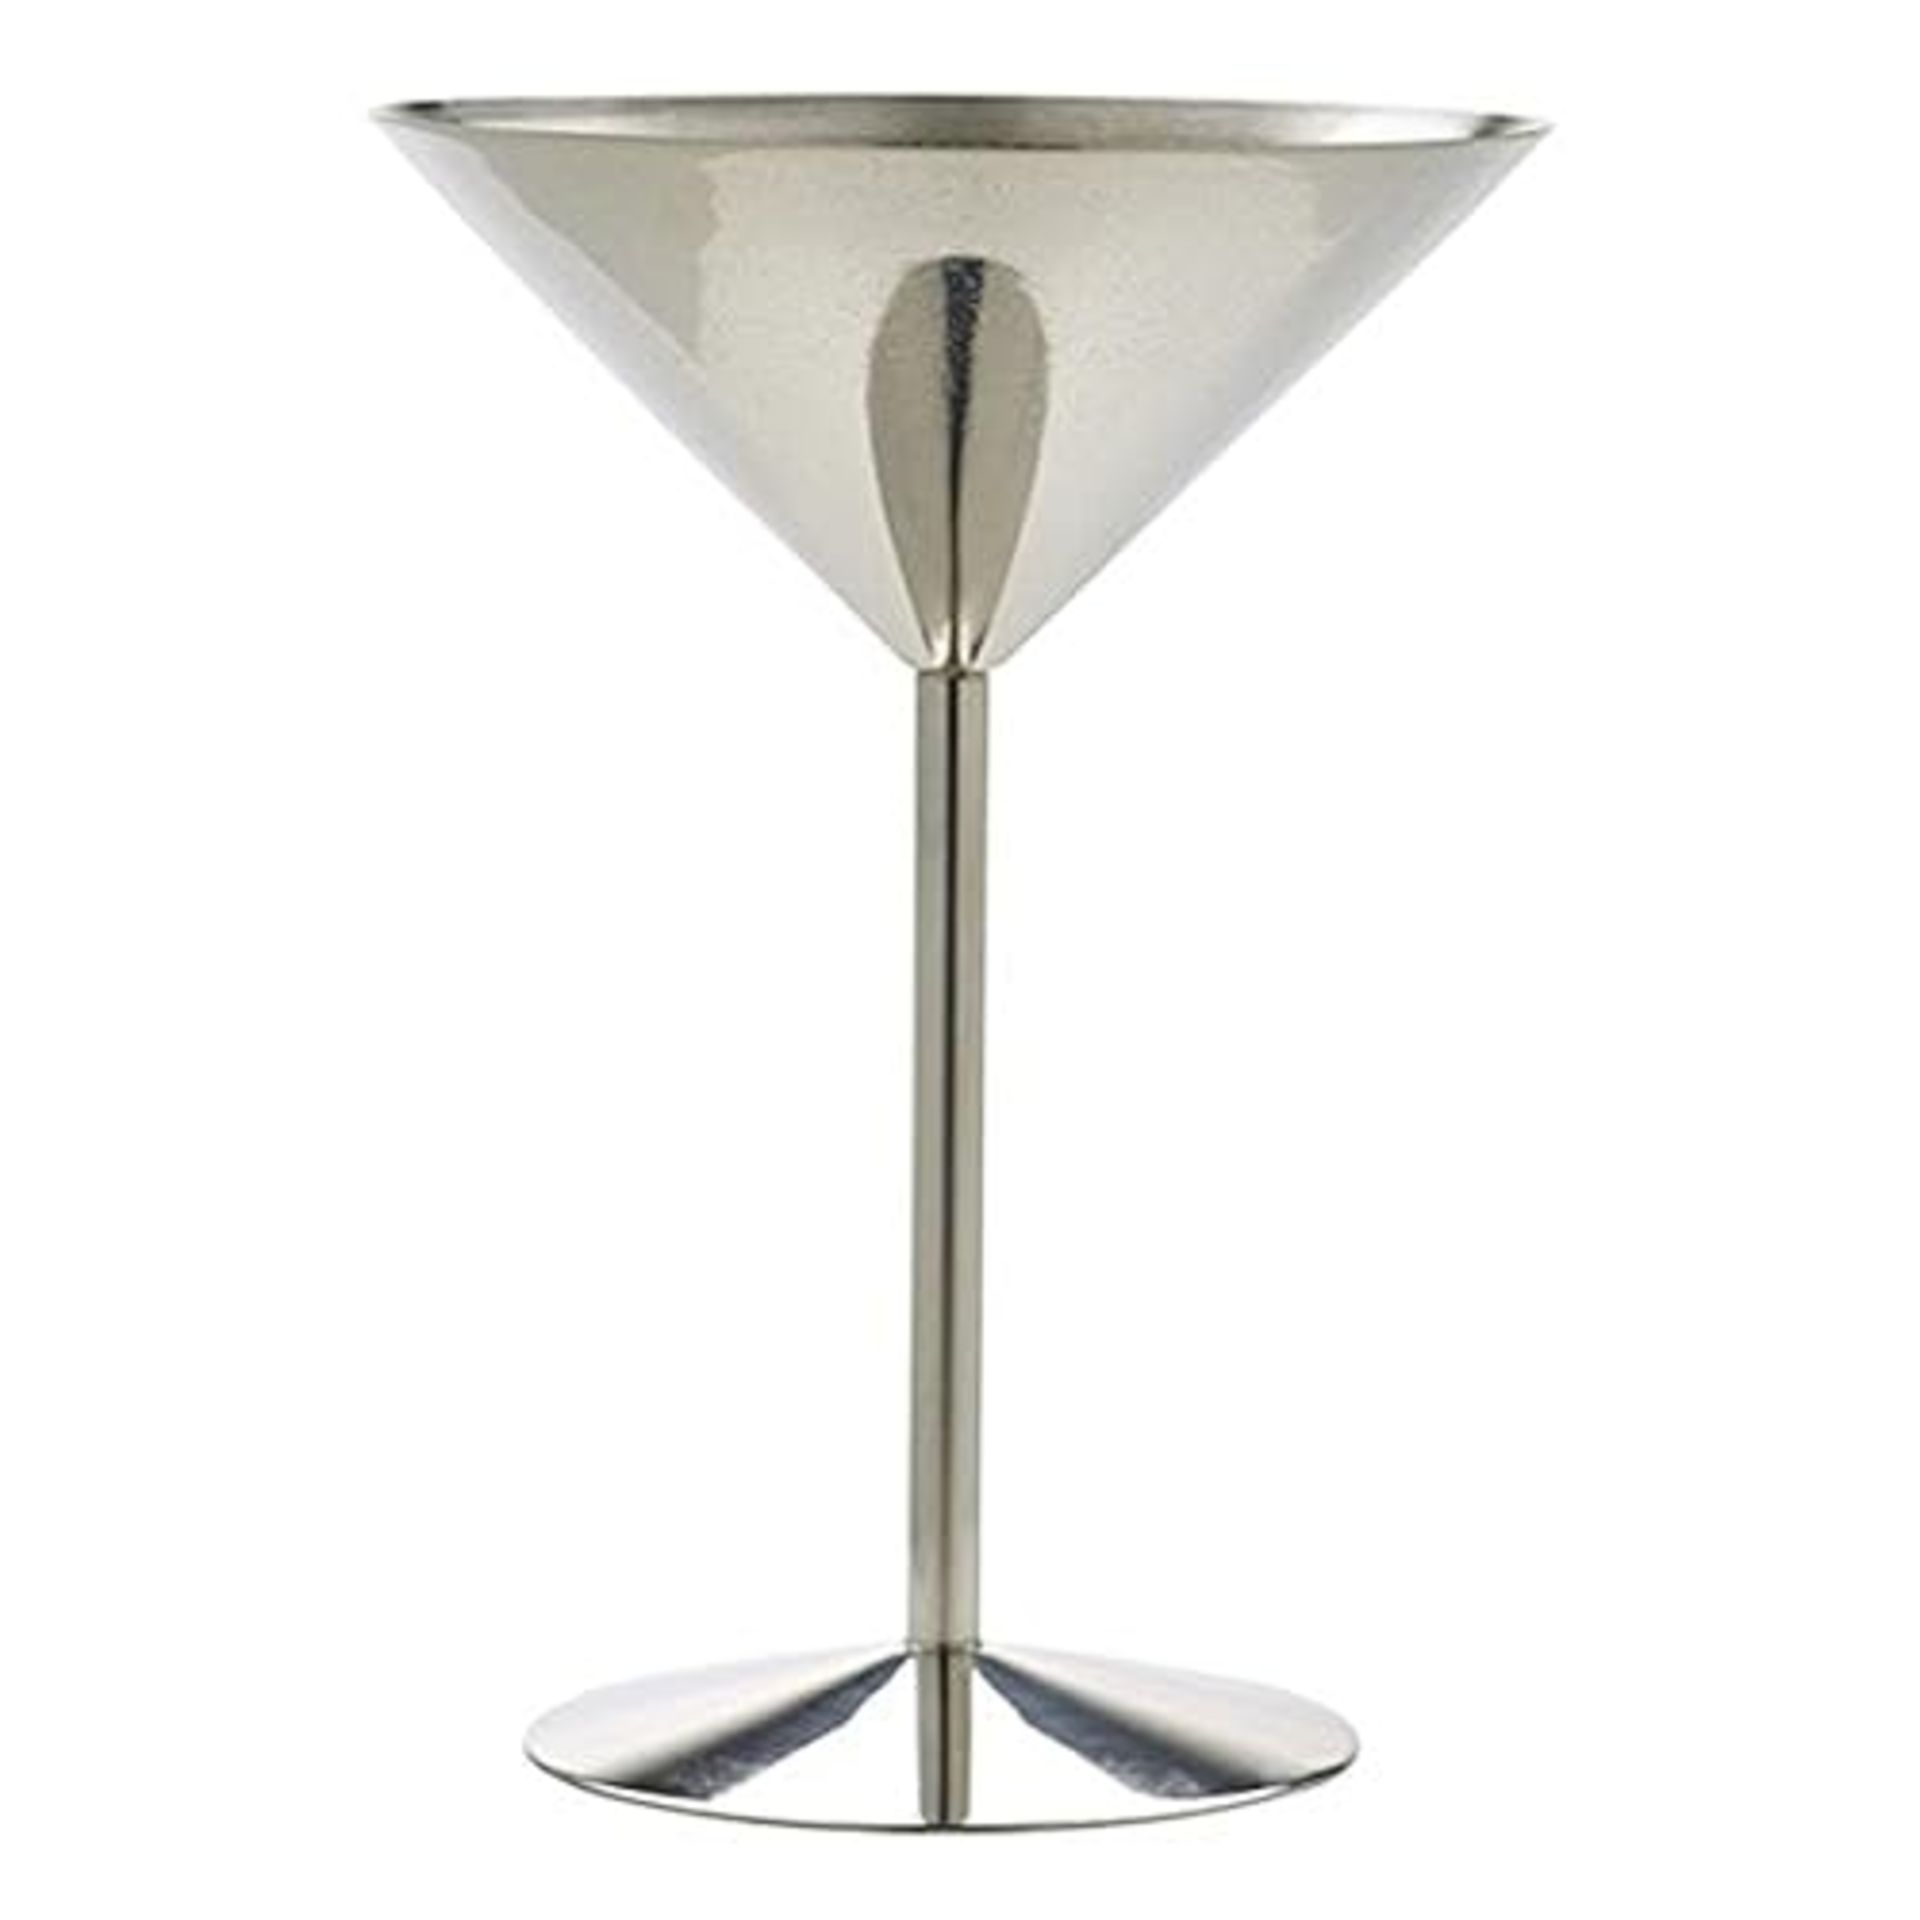 Genware NEV-MRS240 Stainless Steel Martini Glass, 24 cl/8.5 oz.